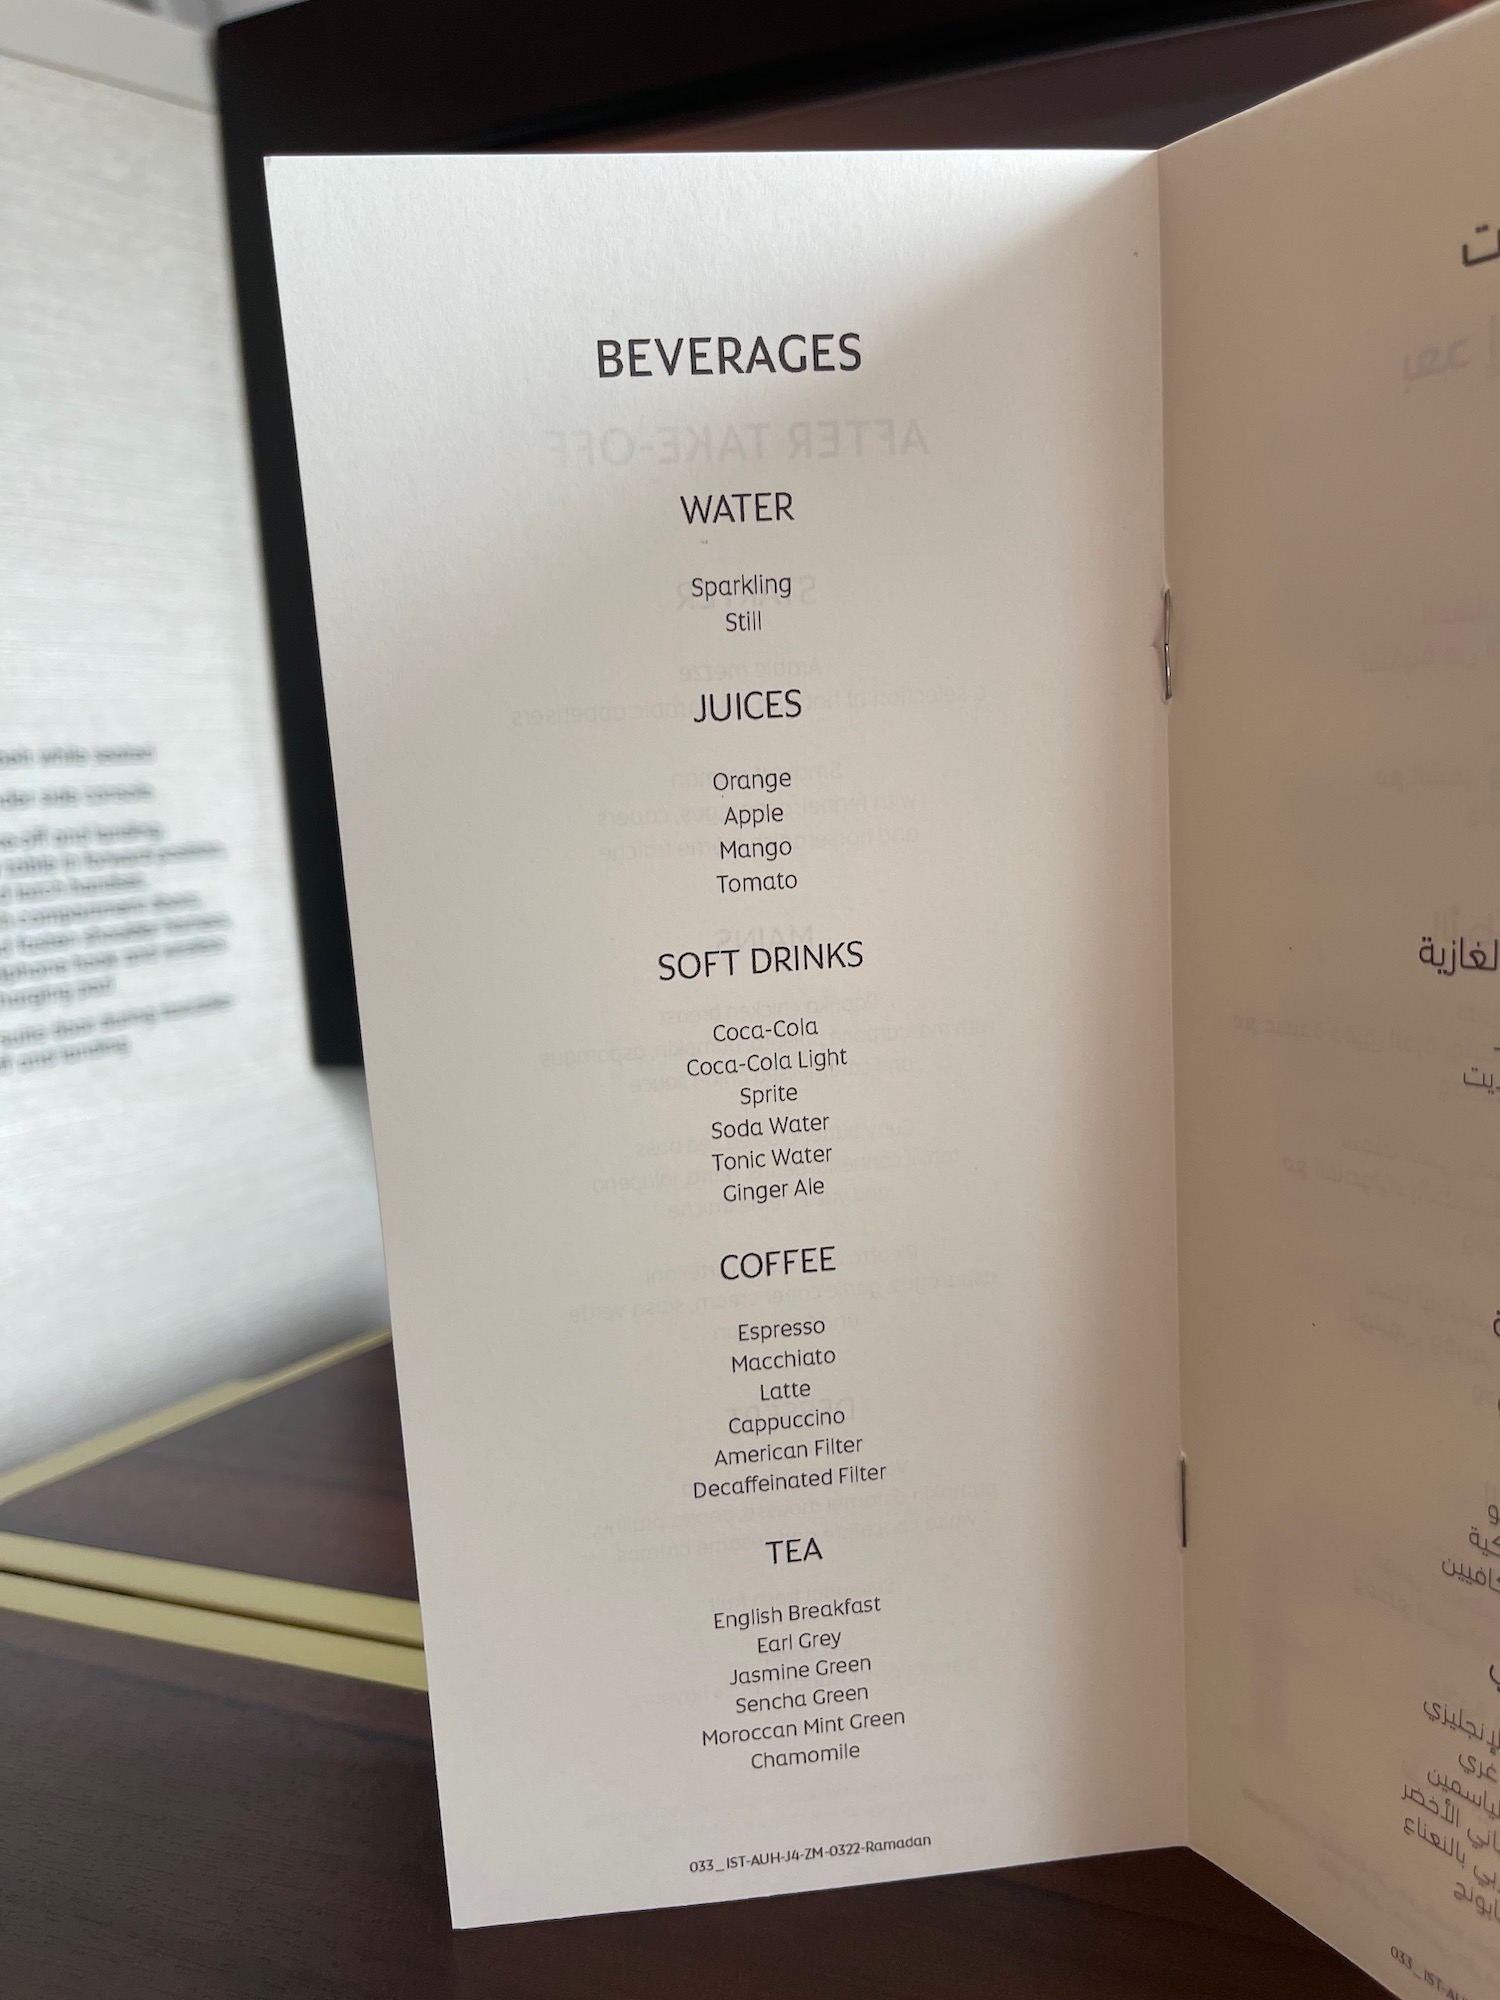 a menu of beverages and drinks